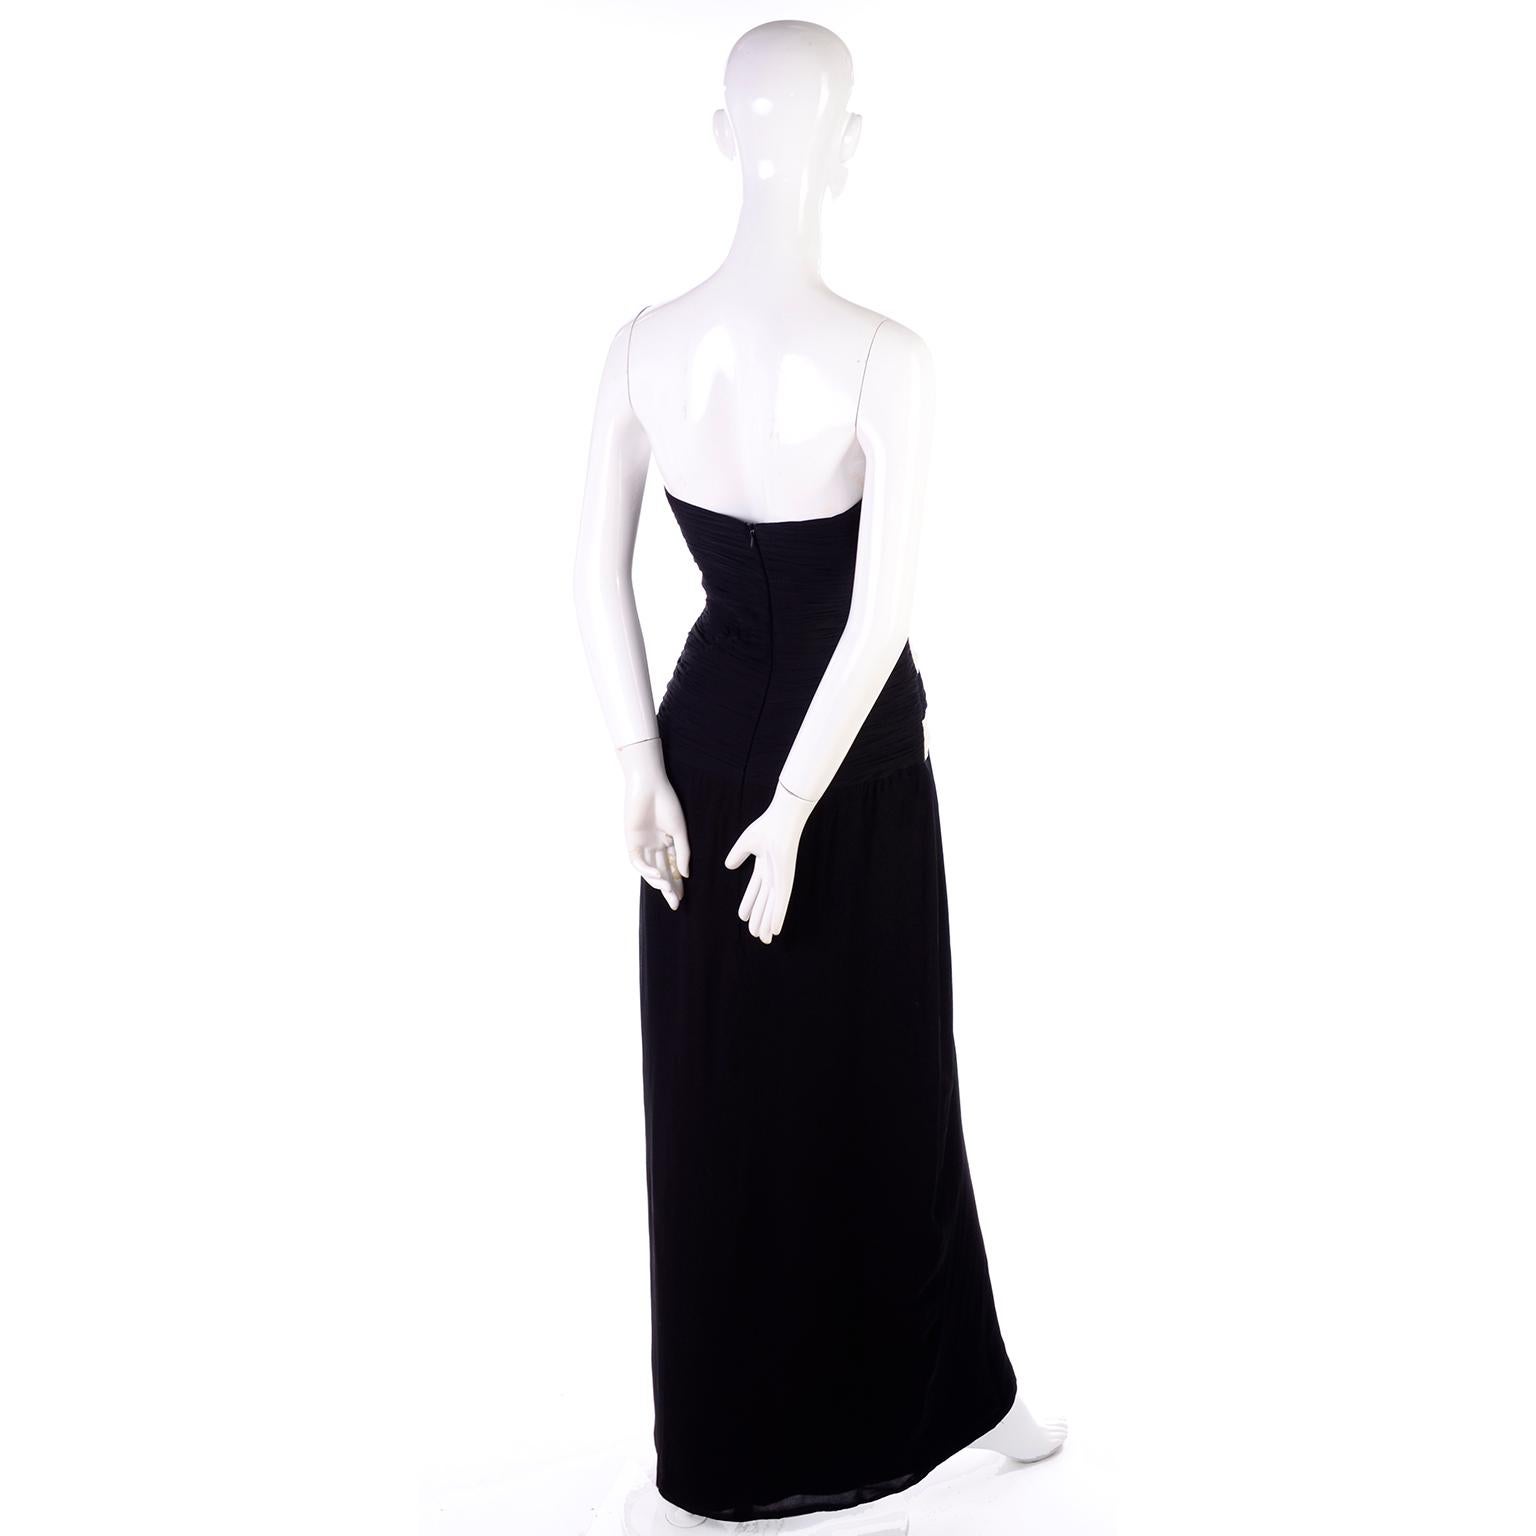 Vintage Black and White Silk Chiffon Dress Strapless Evening Gown 1